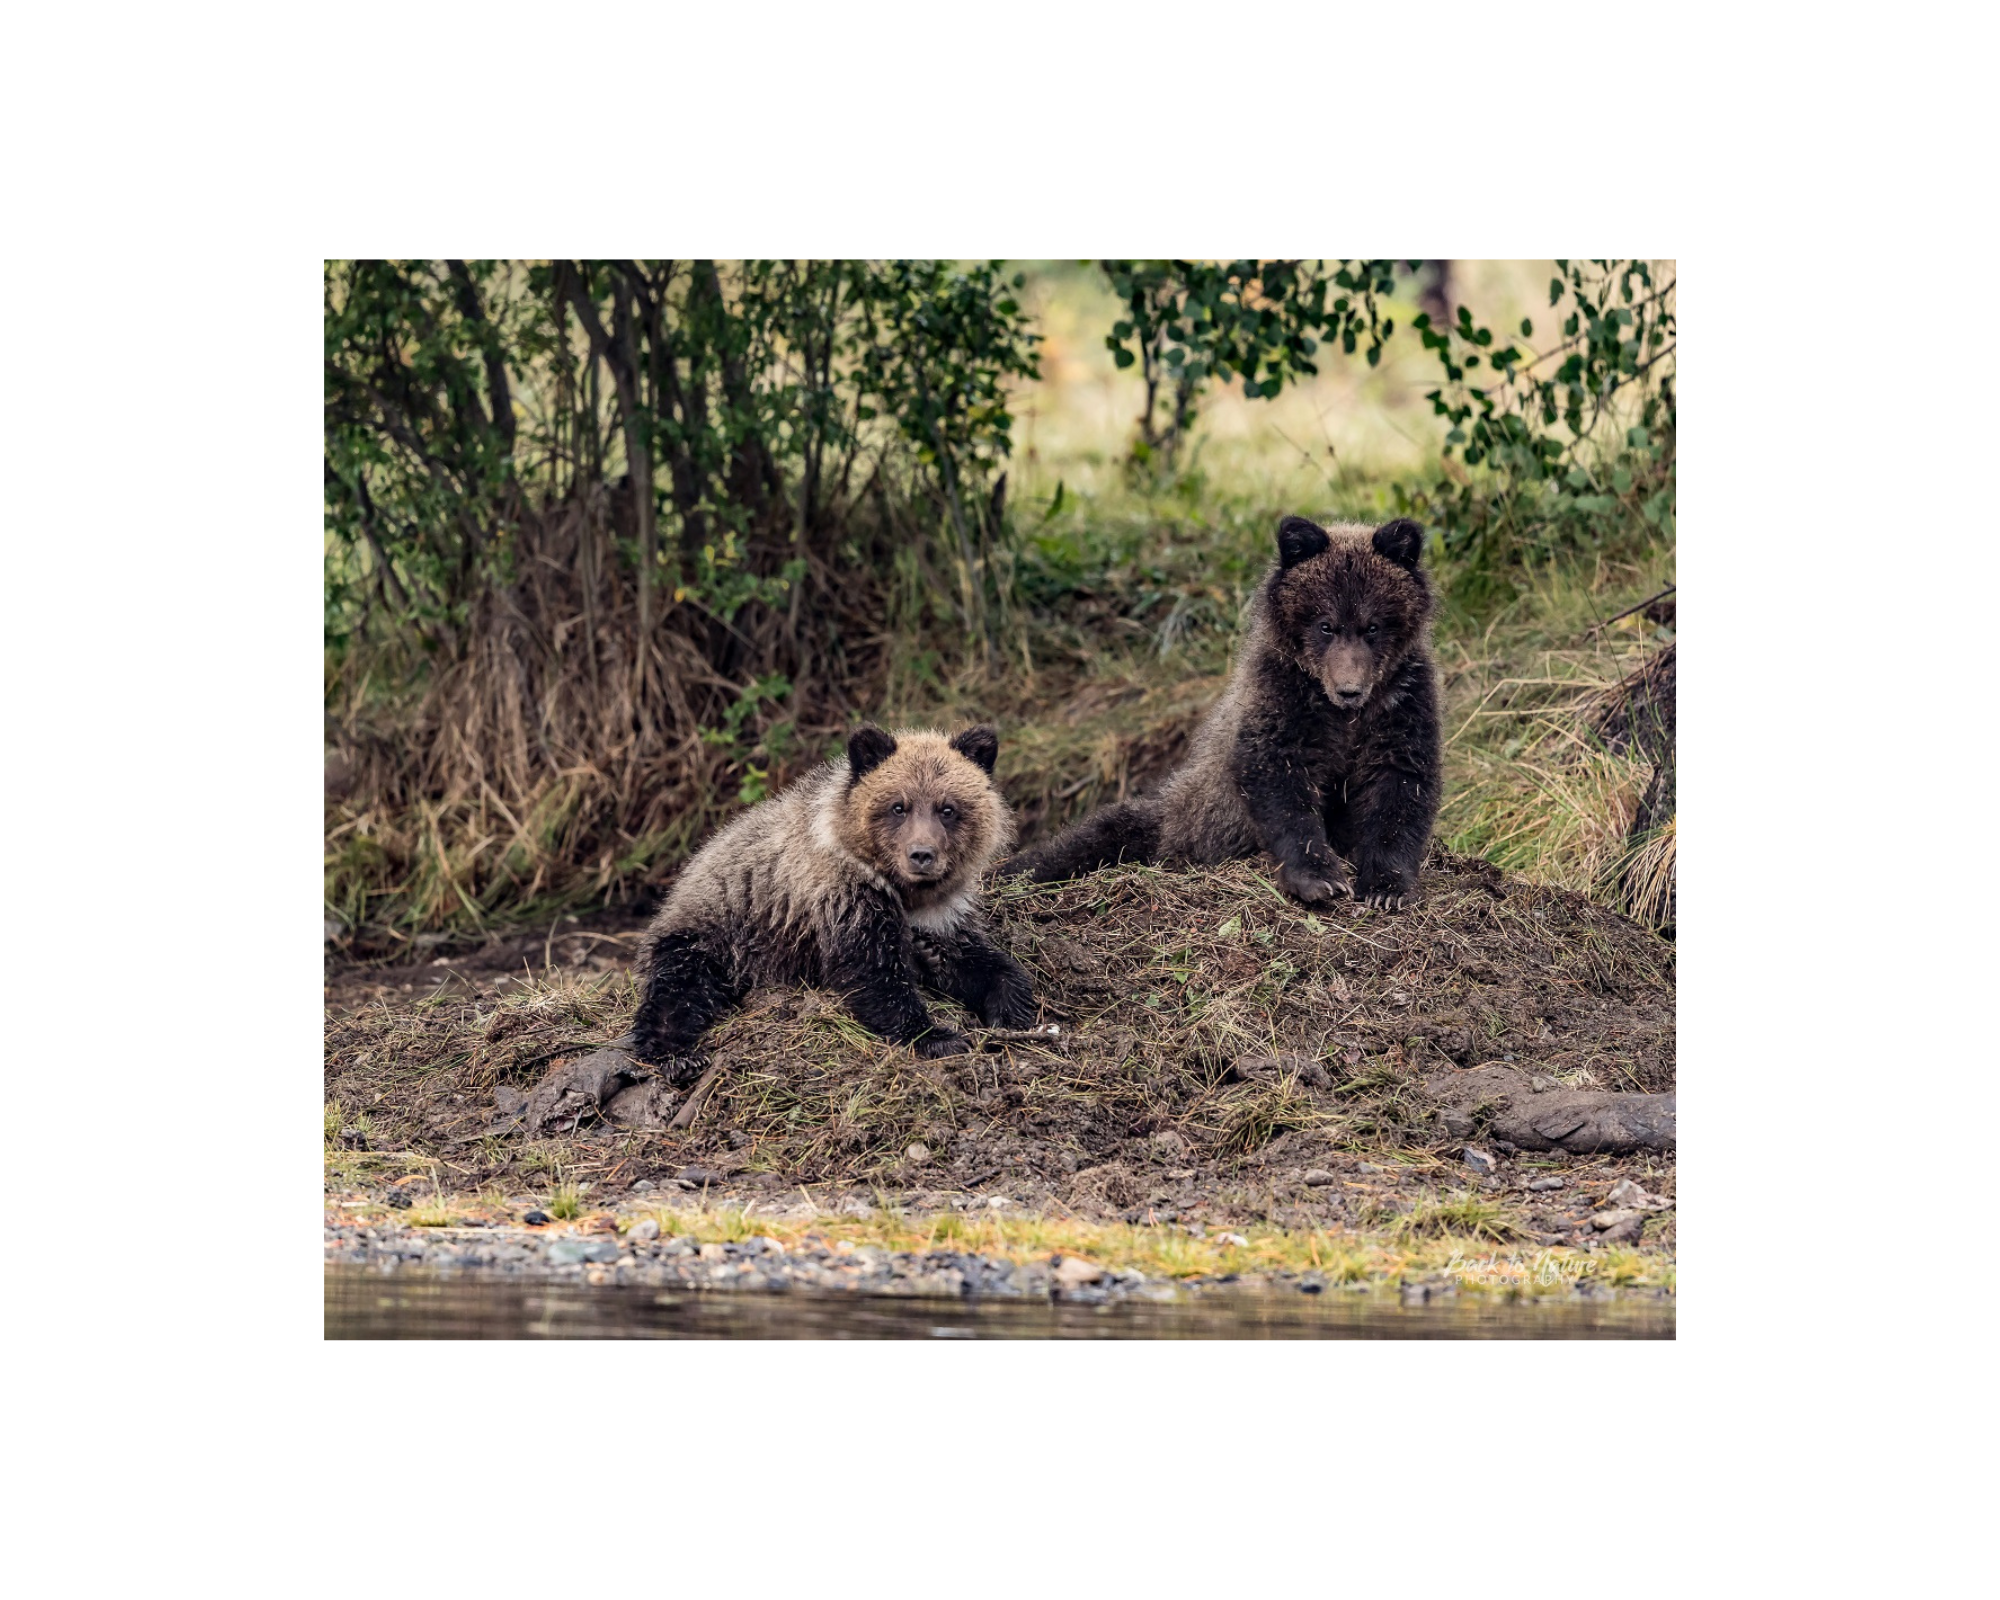 "Young Guns" Grizzly Bear Cubs - 10" x 8" Matted Print